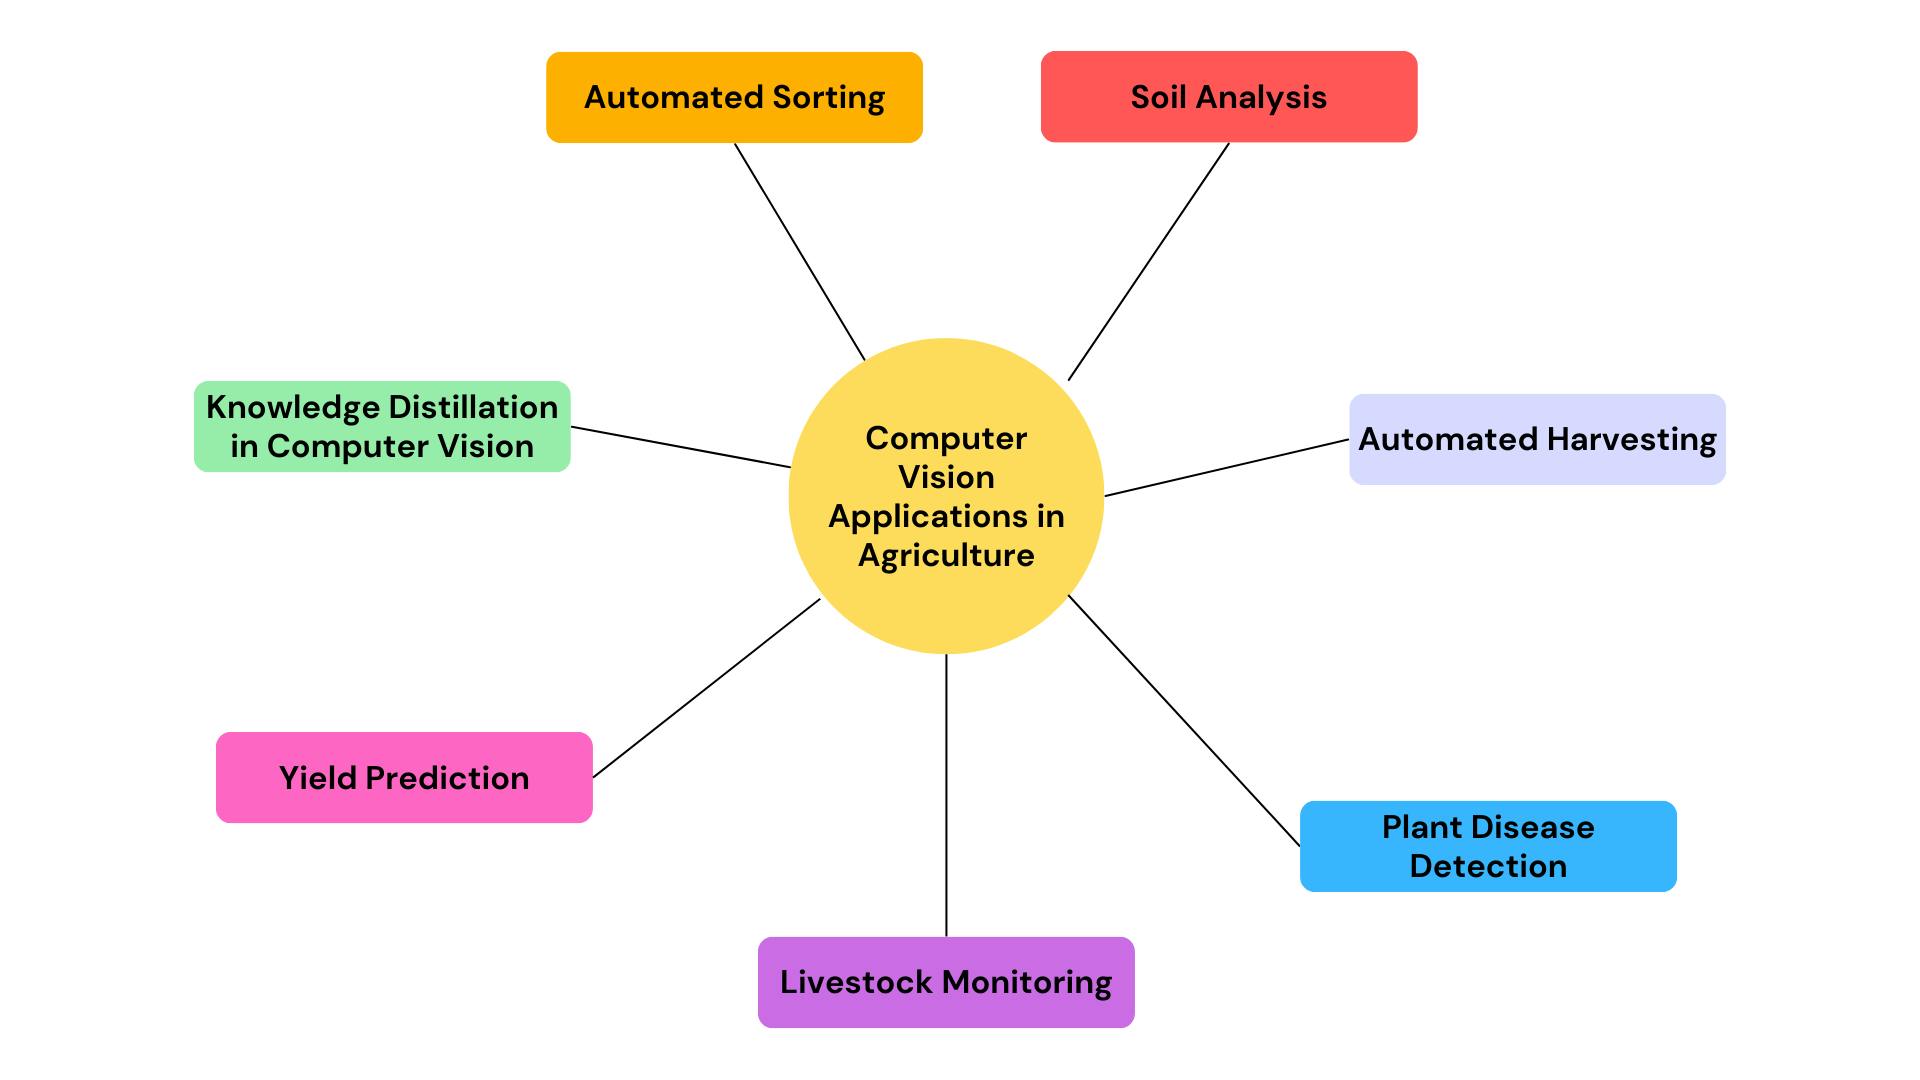 Computer Vision Applications in Agriculture